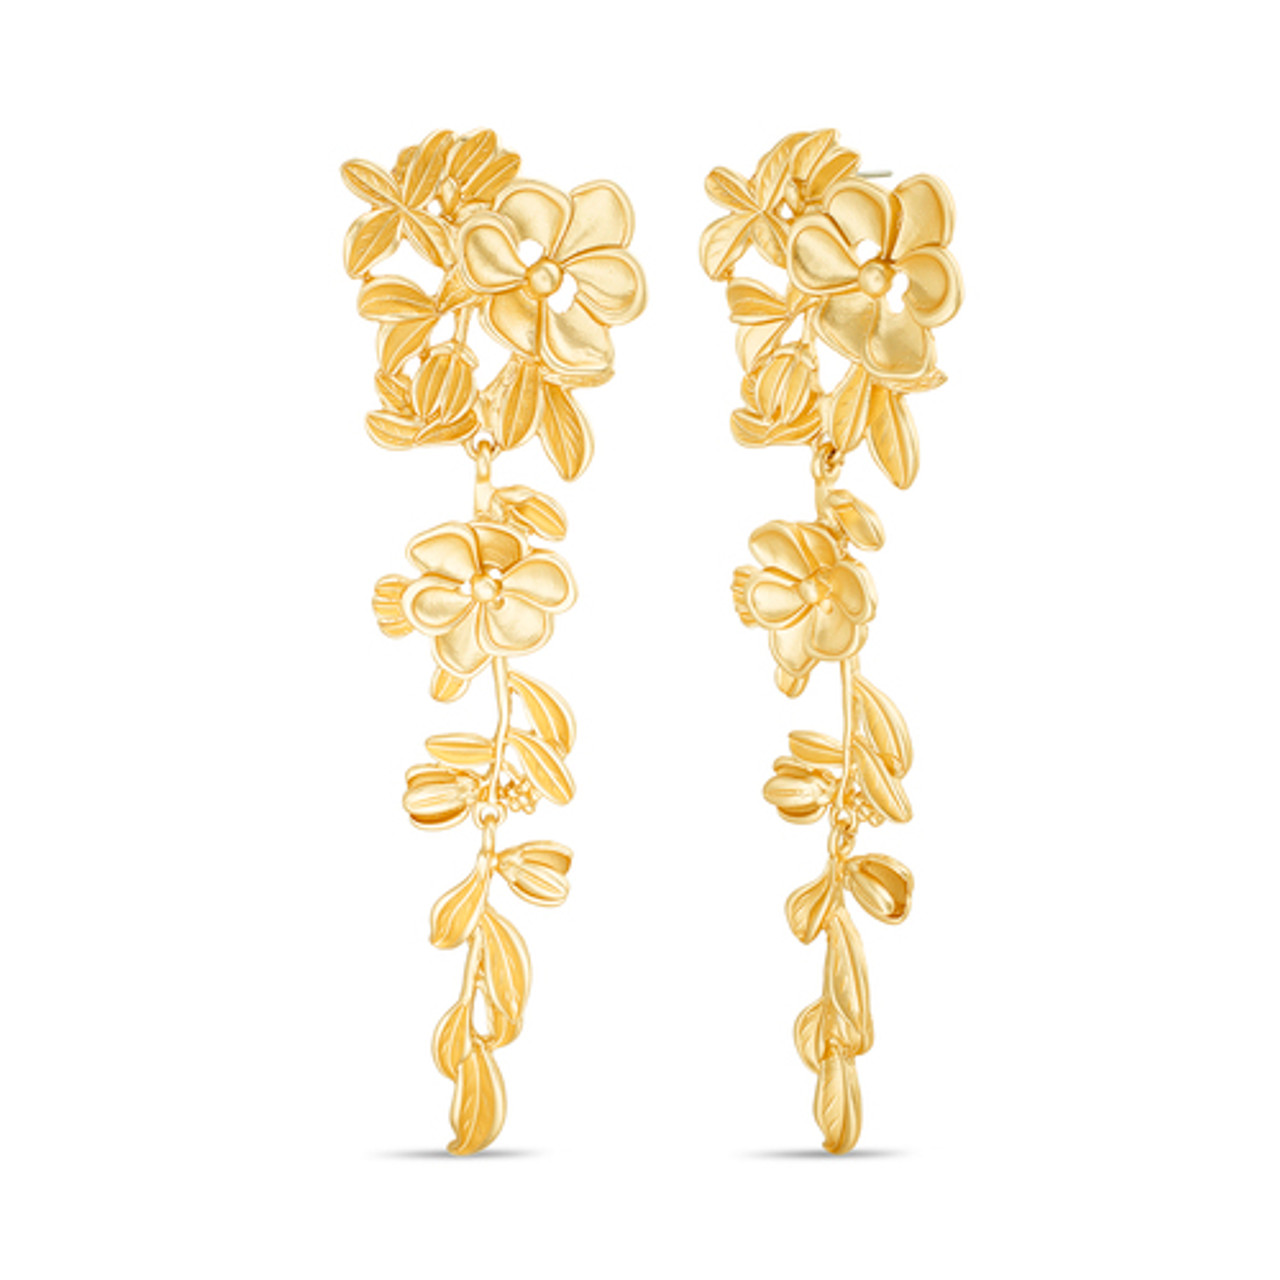 Buy Trendy Gold Plated Floral AD Ear Studs Online|Kollam Supreme